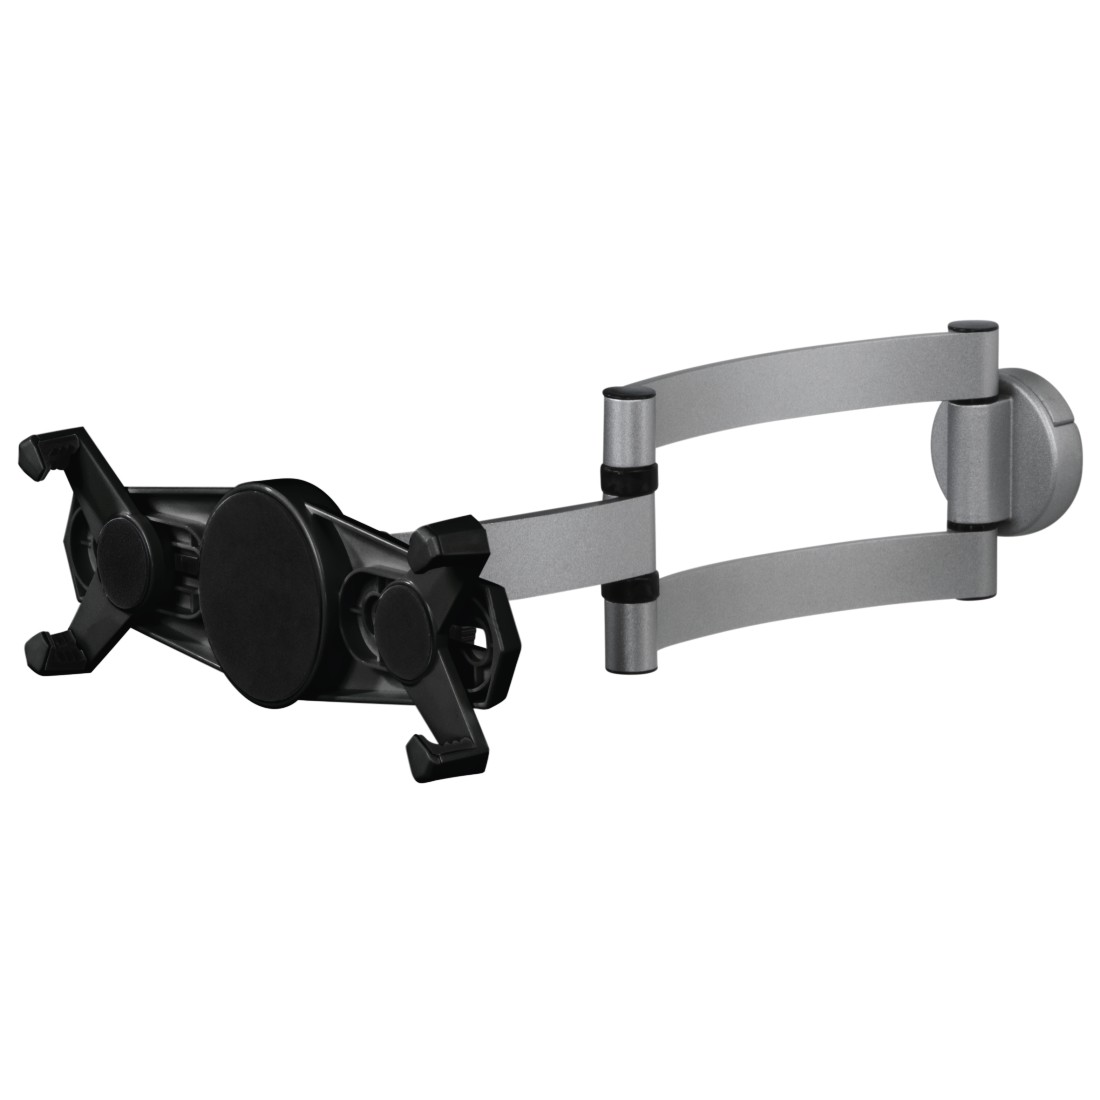 Hama Wall Bracket for tablets from 7in to 10.5in